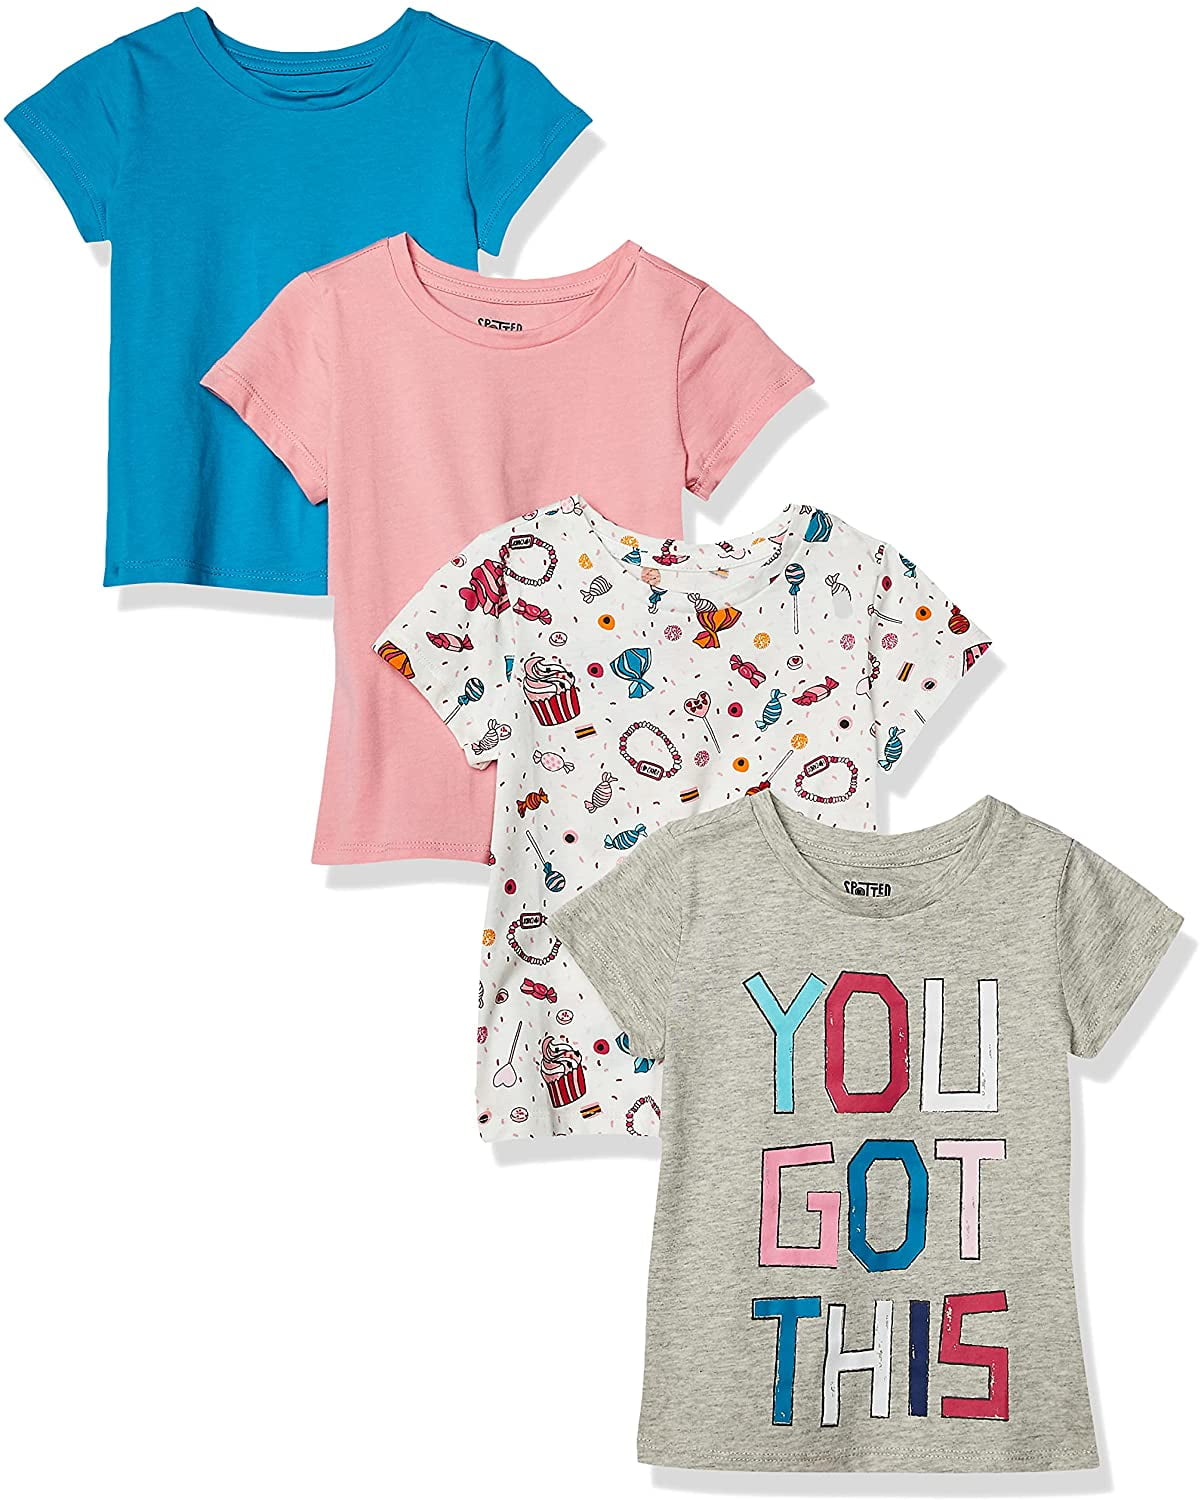 Spotted Zebra Girls and Toddlers' Short-Sleeve T-Shirts Multipacks 